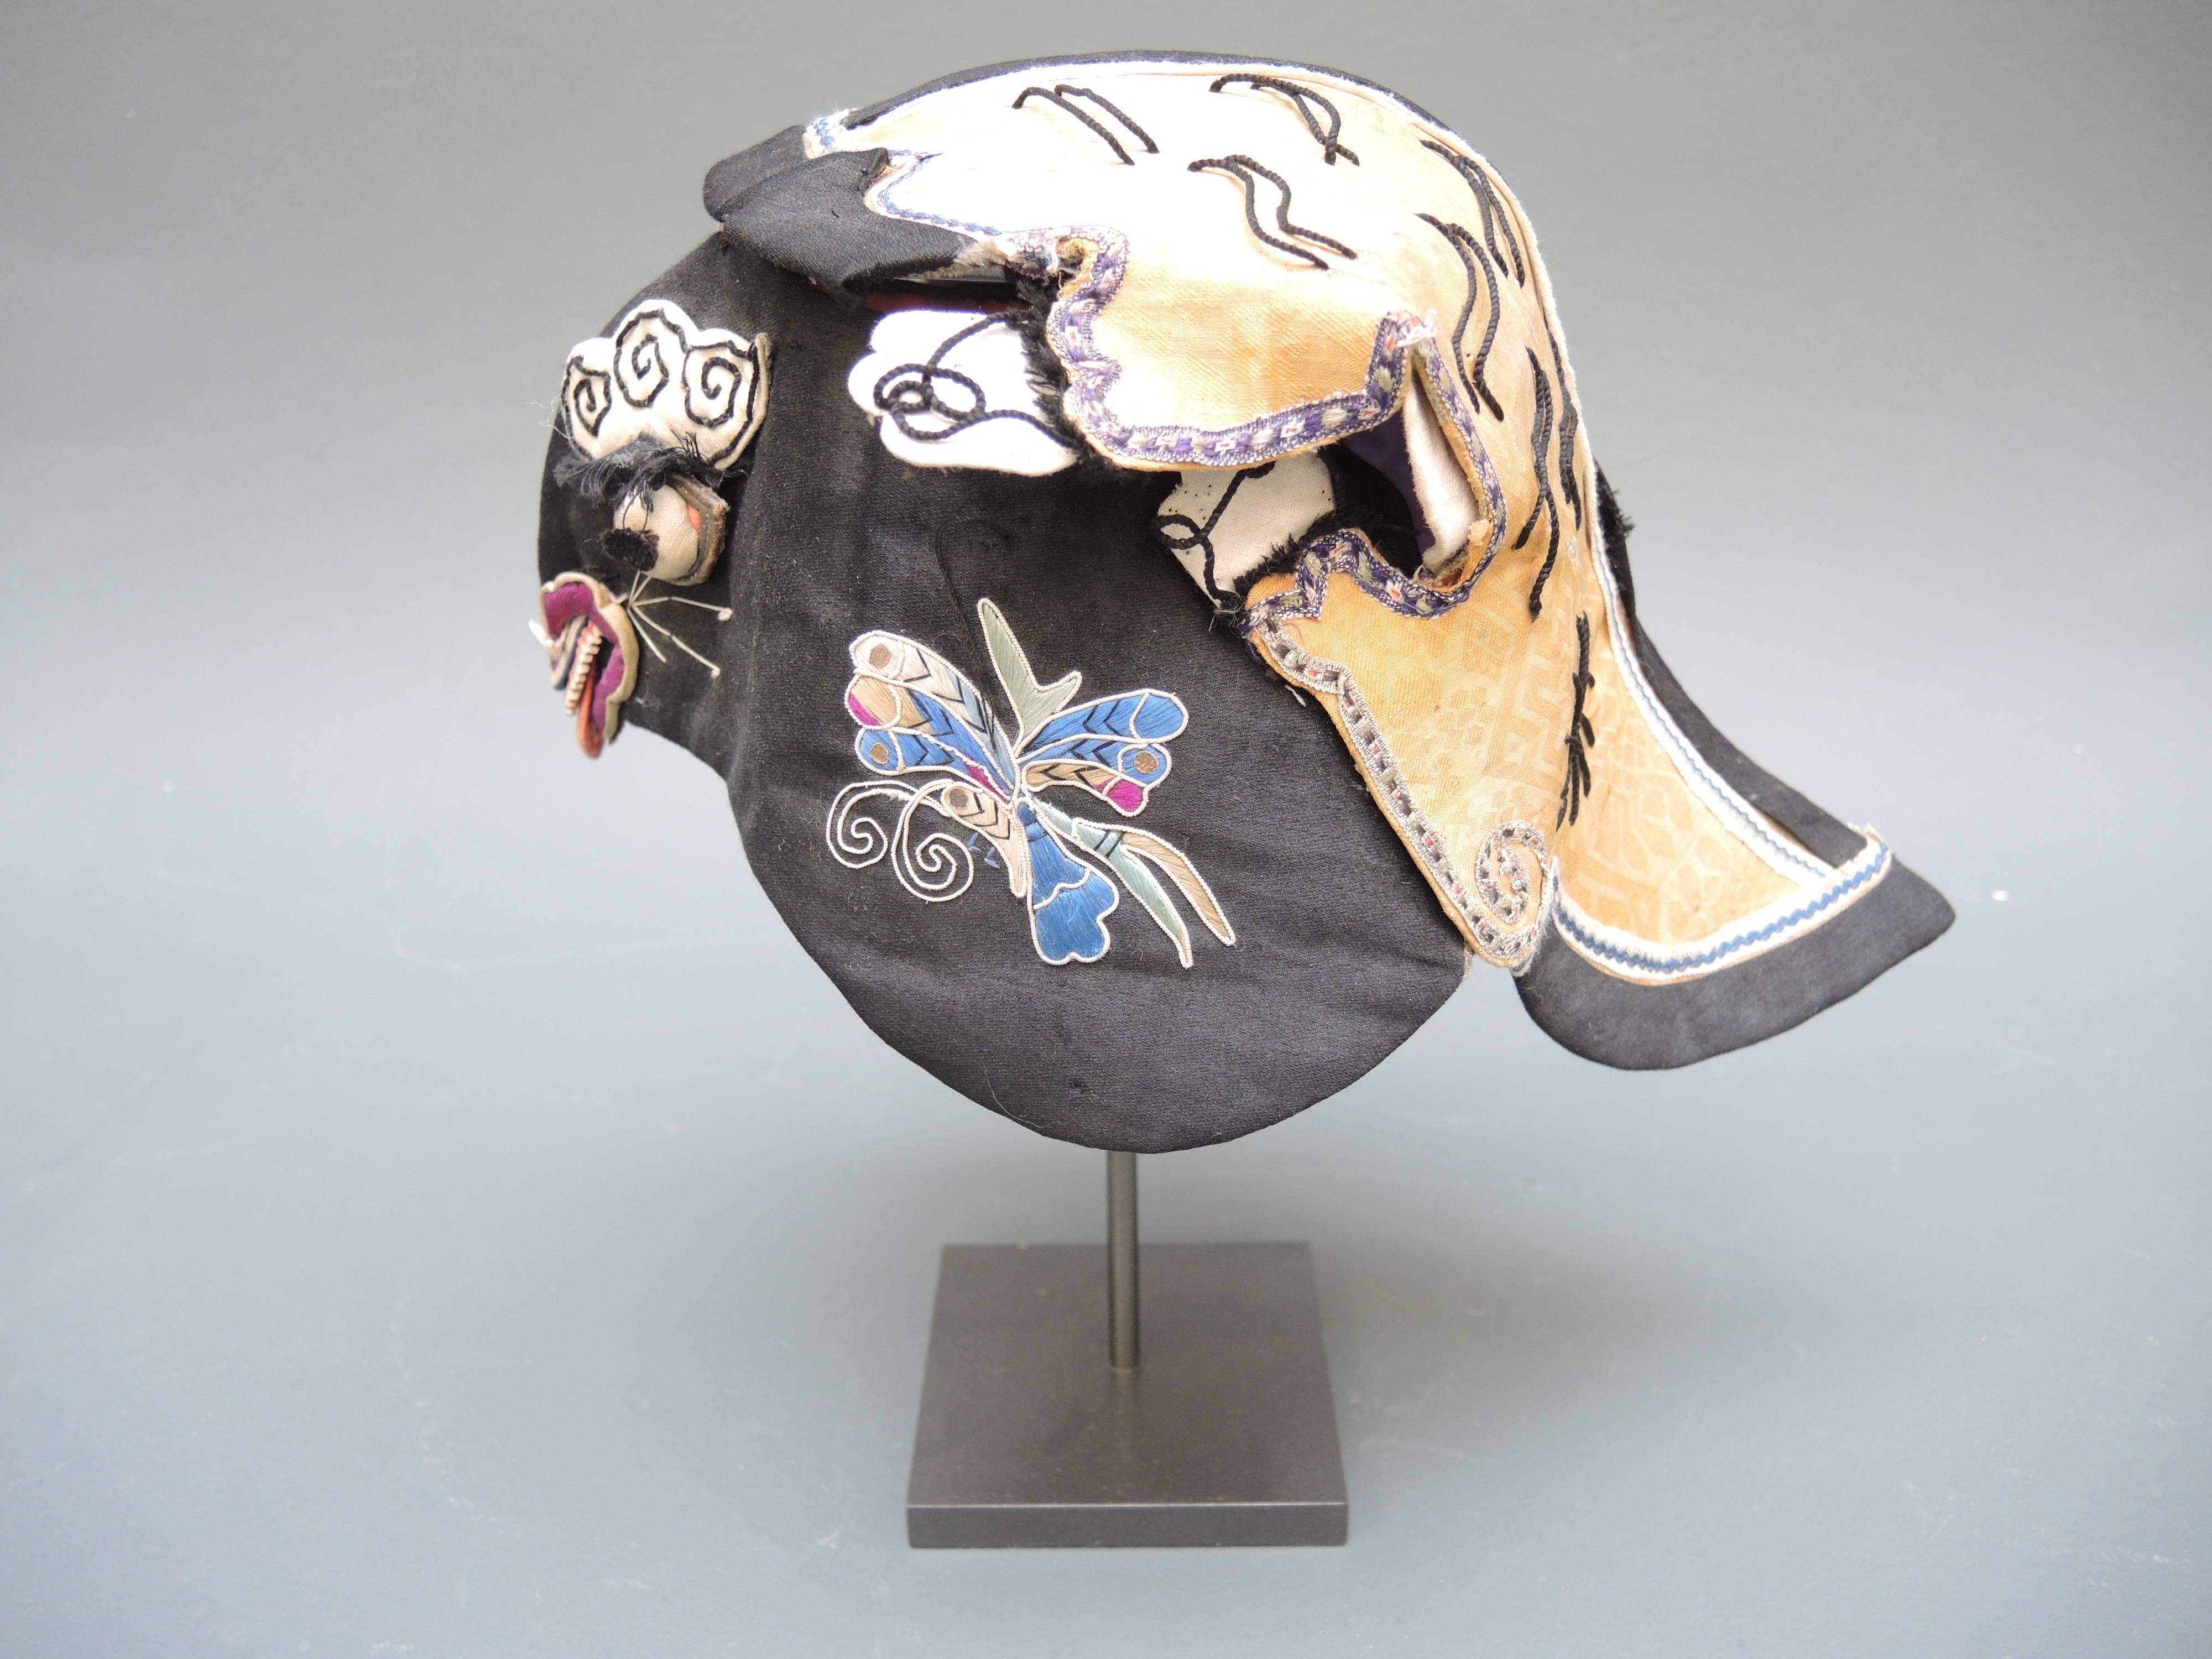 Chinese children's festival hats each with its own character. Fine silk hand embroidery of grasshoppers, flowers and butterflies adorn the two silk scholars hats while the other cotton hat is made in the shape of a noble tigers head celebrating the